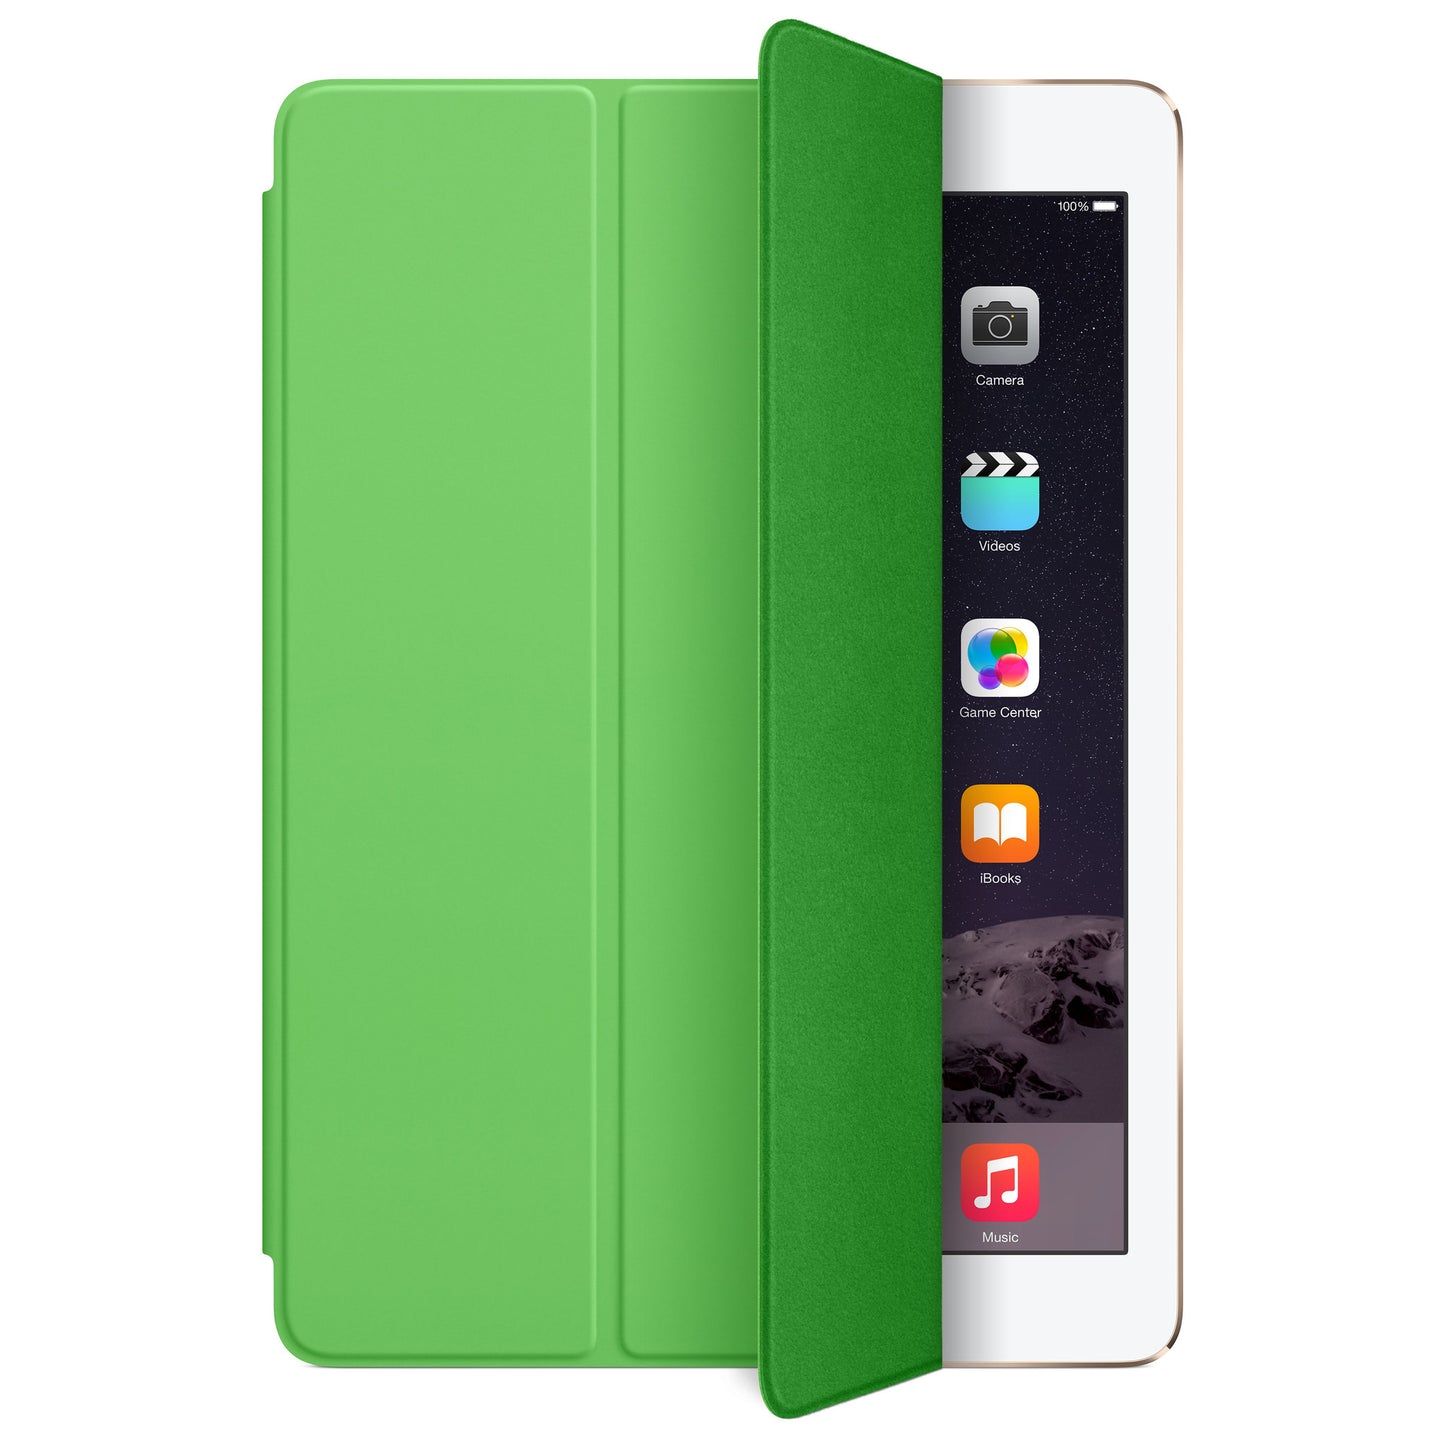 Apple Smart Cover Cover Case (Cover) for iPad Air - Green